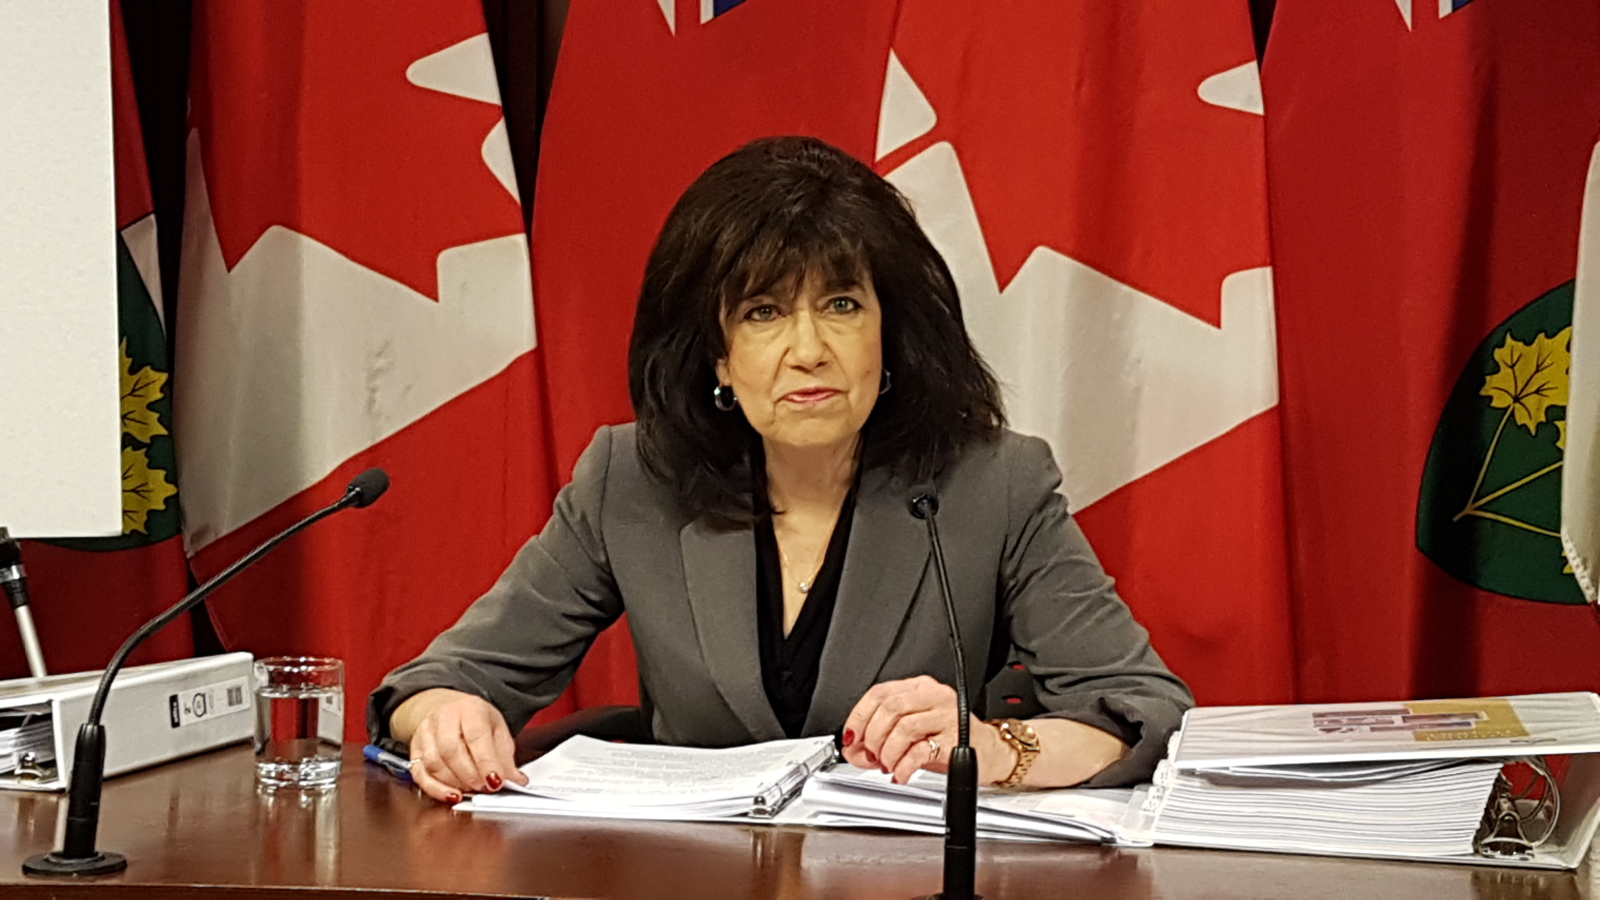 Ontario Auditor General Bonnie Lysyk speaks to media following the release of her annual report in Toronto on Dec. 5, 2018. Photo by Fatima Syed